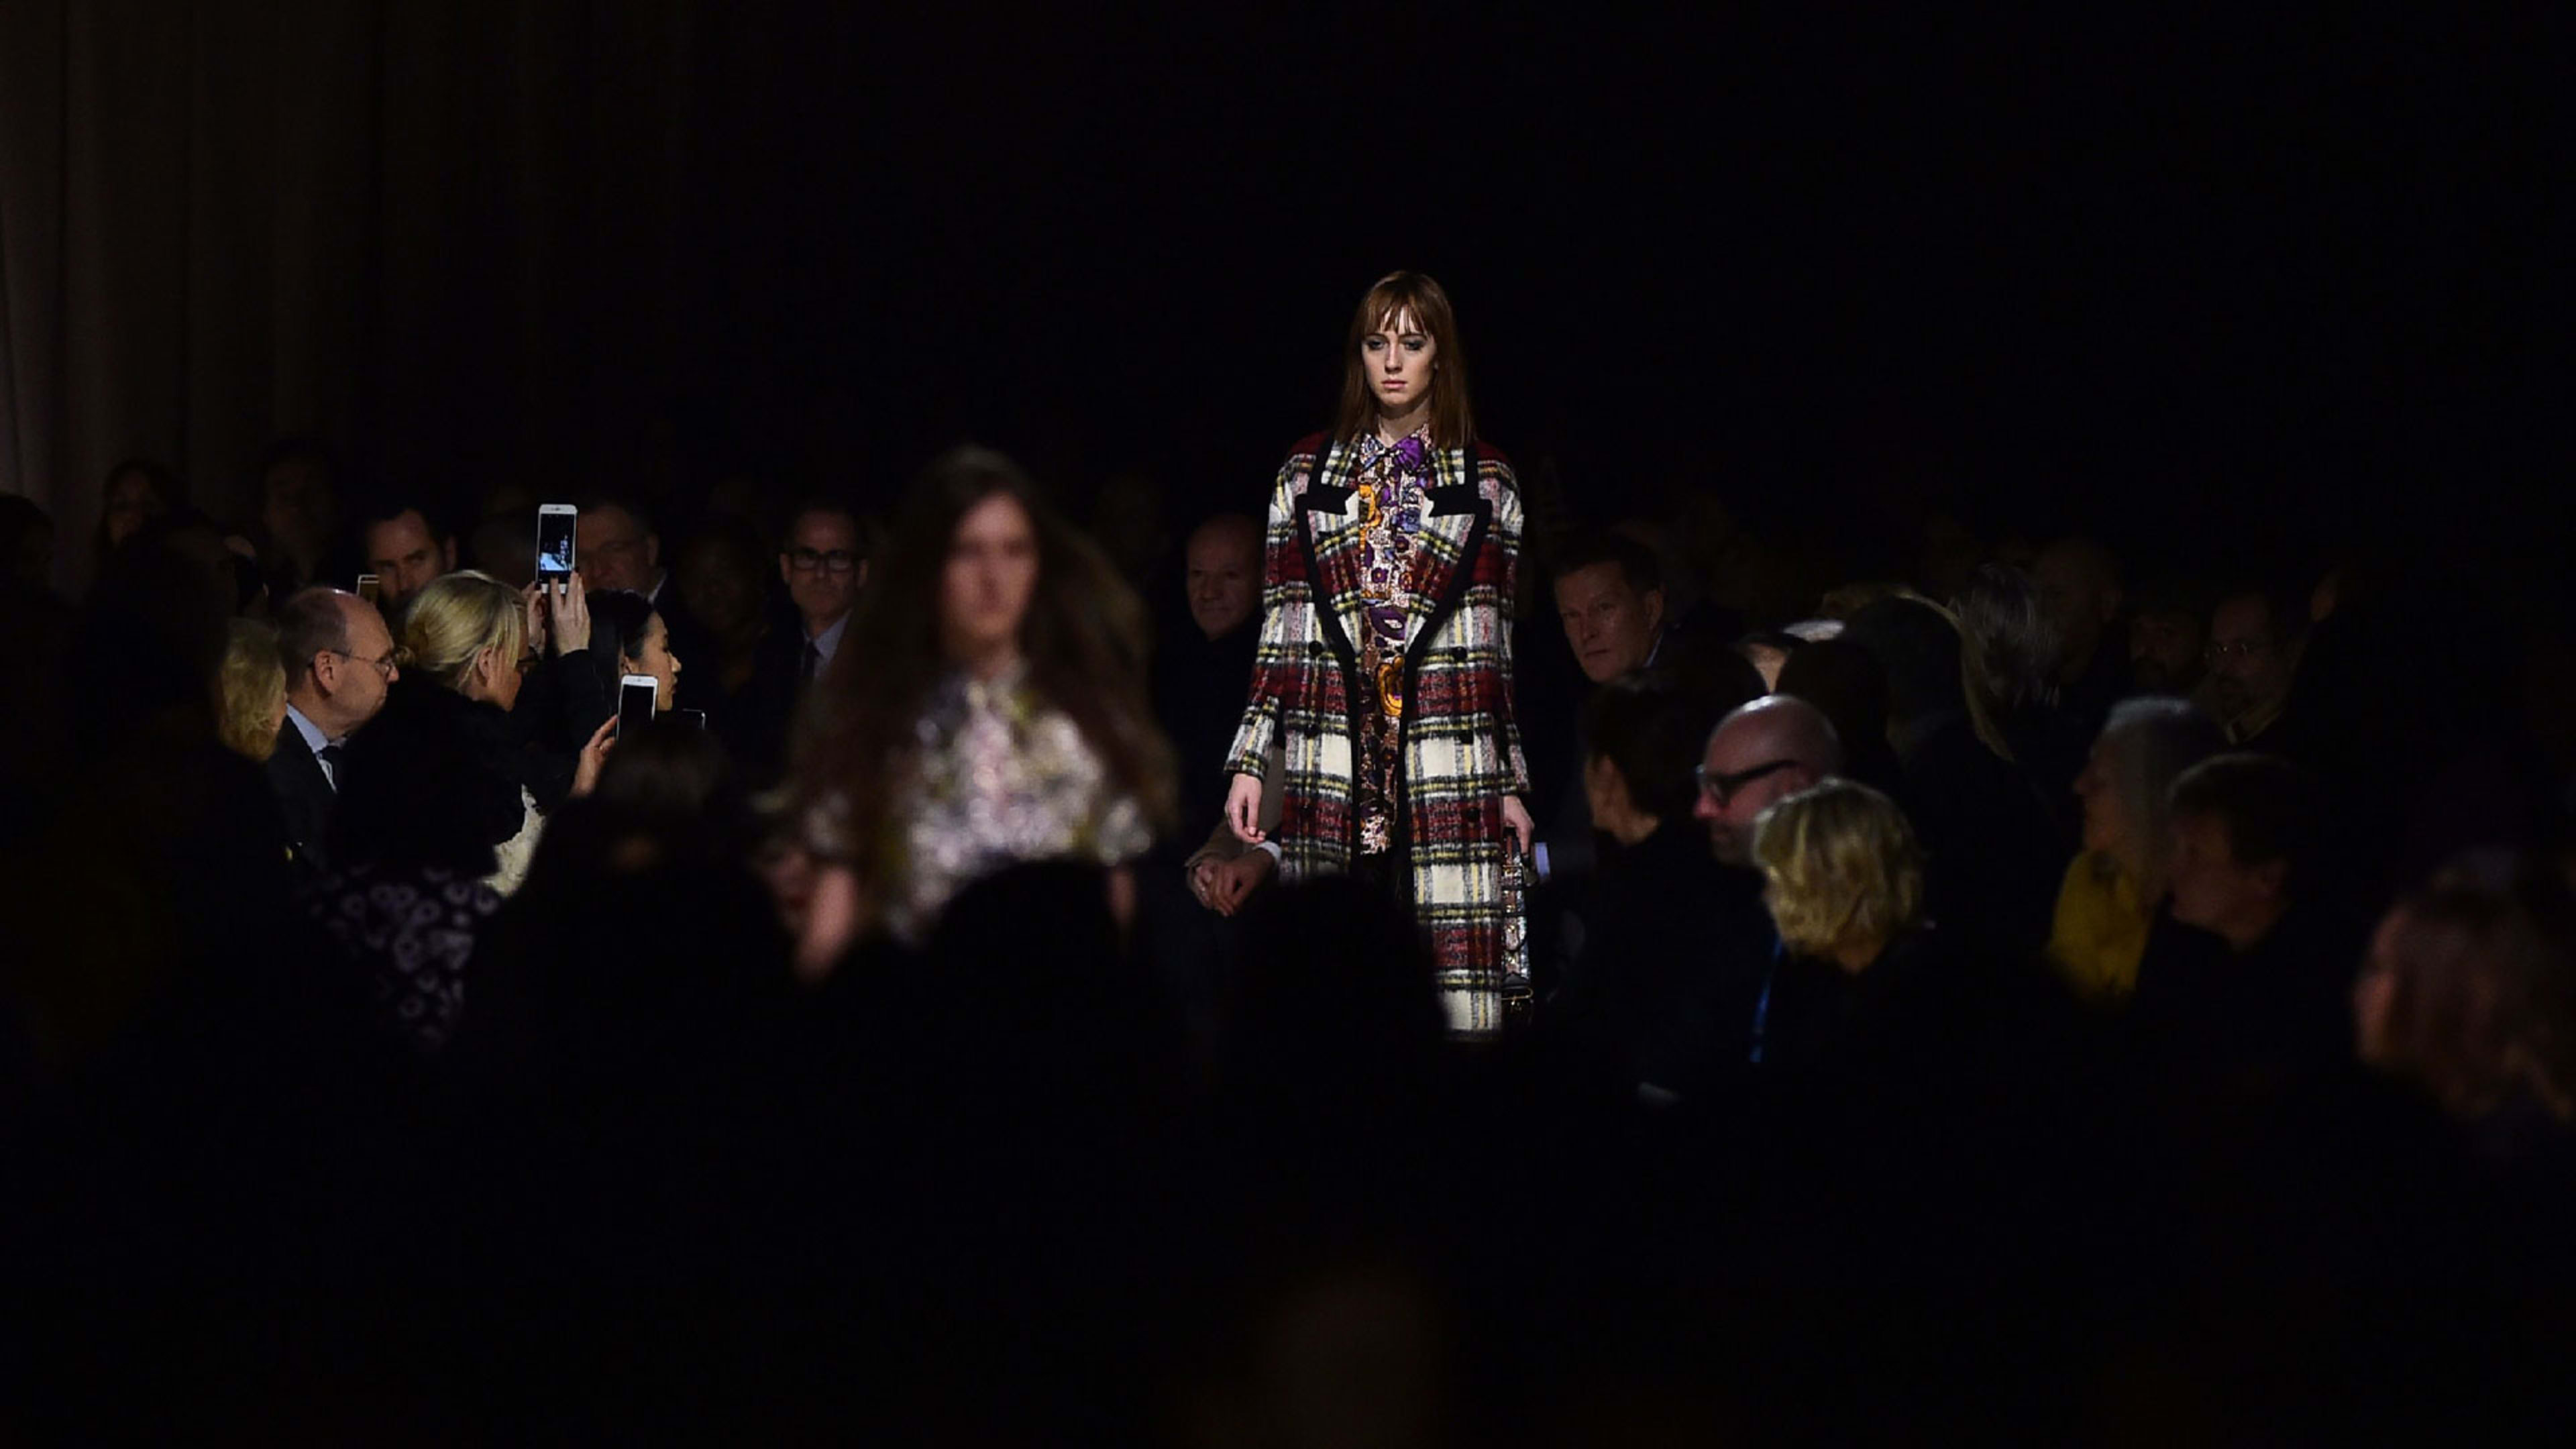 Burberry Combined Business And Creativity In One Exec. Here’s Why It Was A Bad Fit